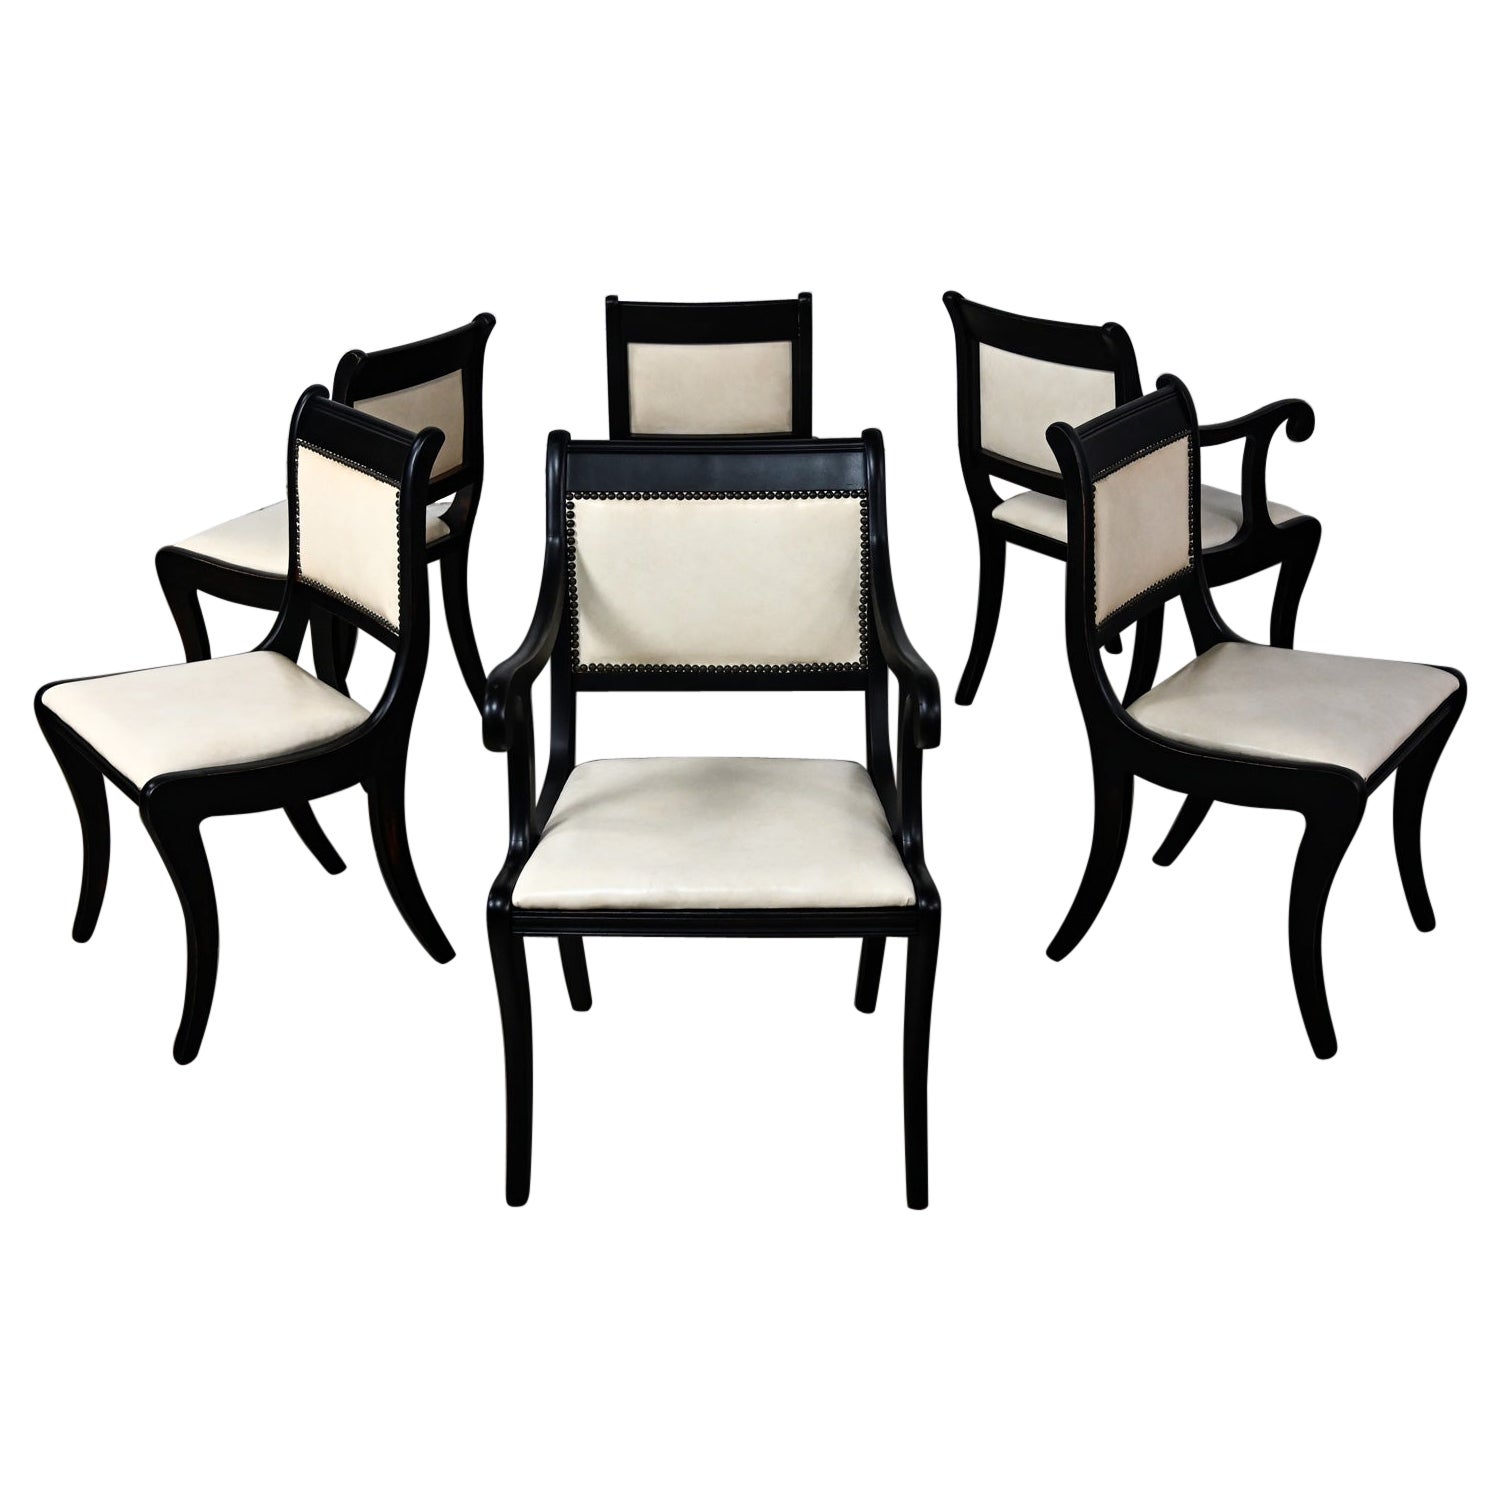 Mid 20th Regency Style Dining Chairs Off White Faux Leather Black Frames Set 6